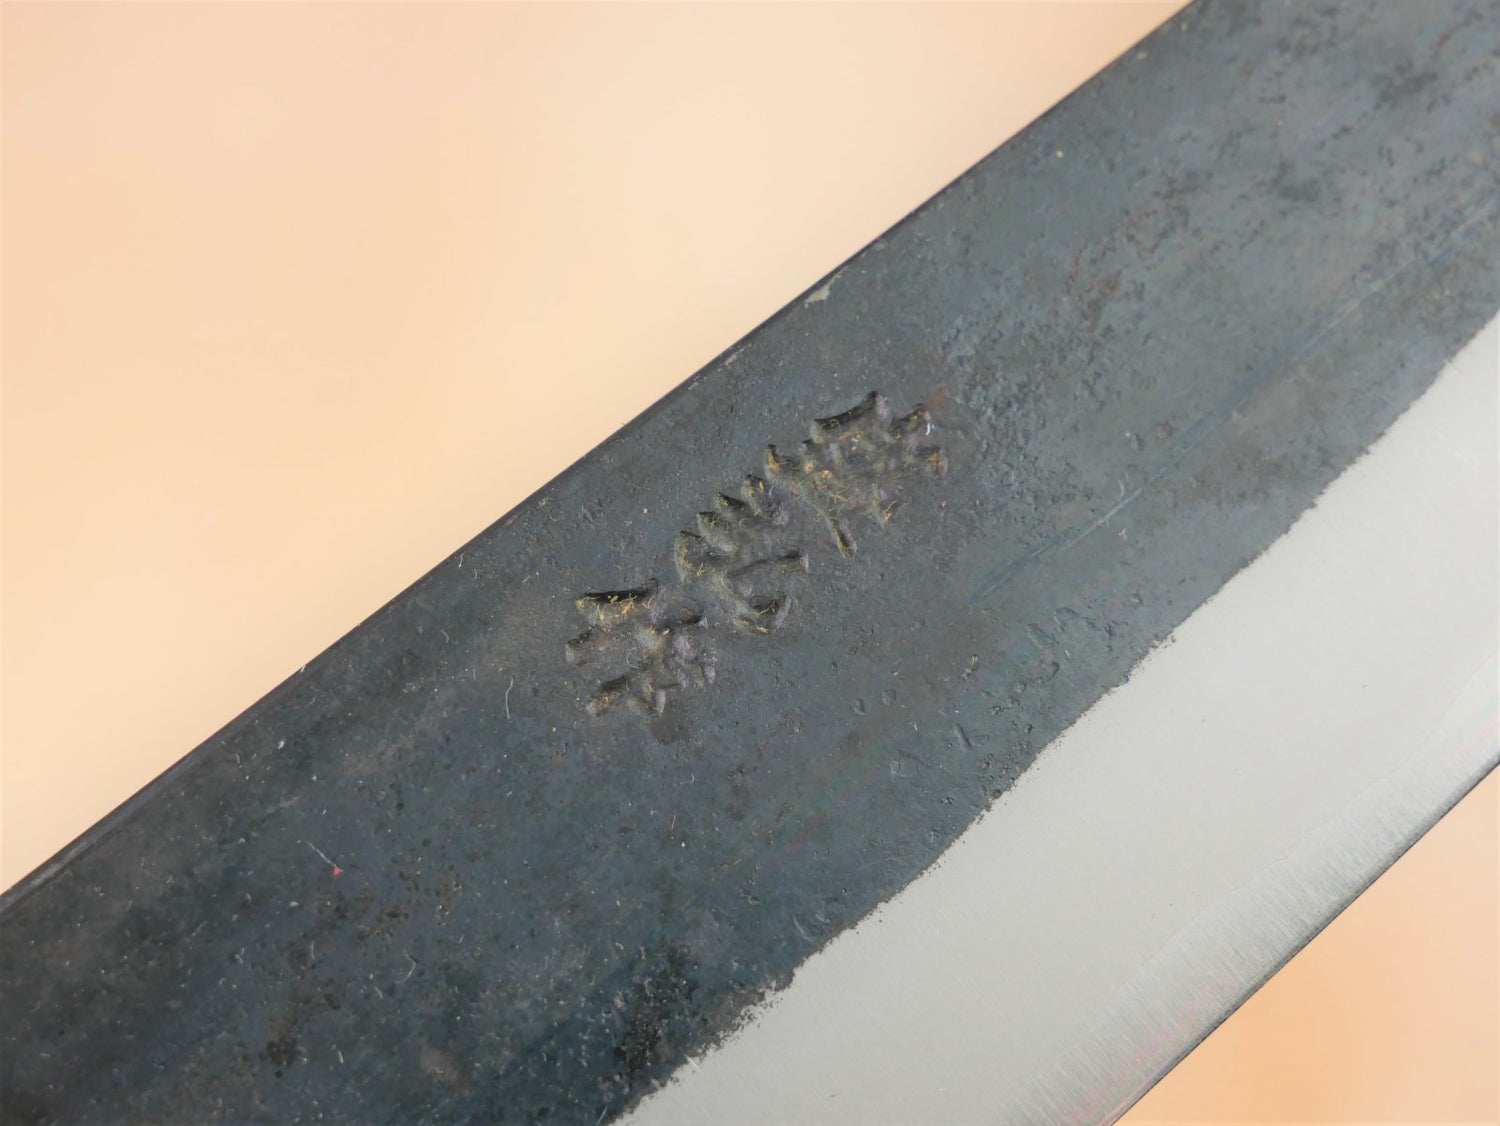 Maker's mark on blade face of 180mm Aogami No.2 Kurouchi Gyuto forged by Yasuaki Taira